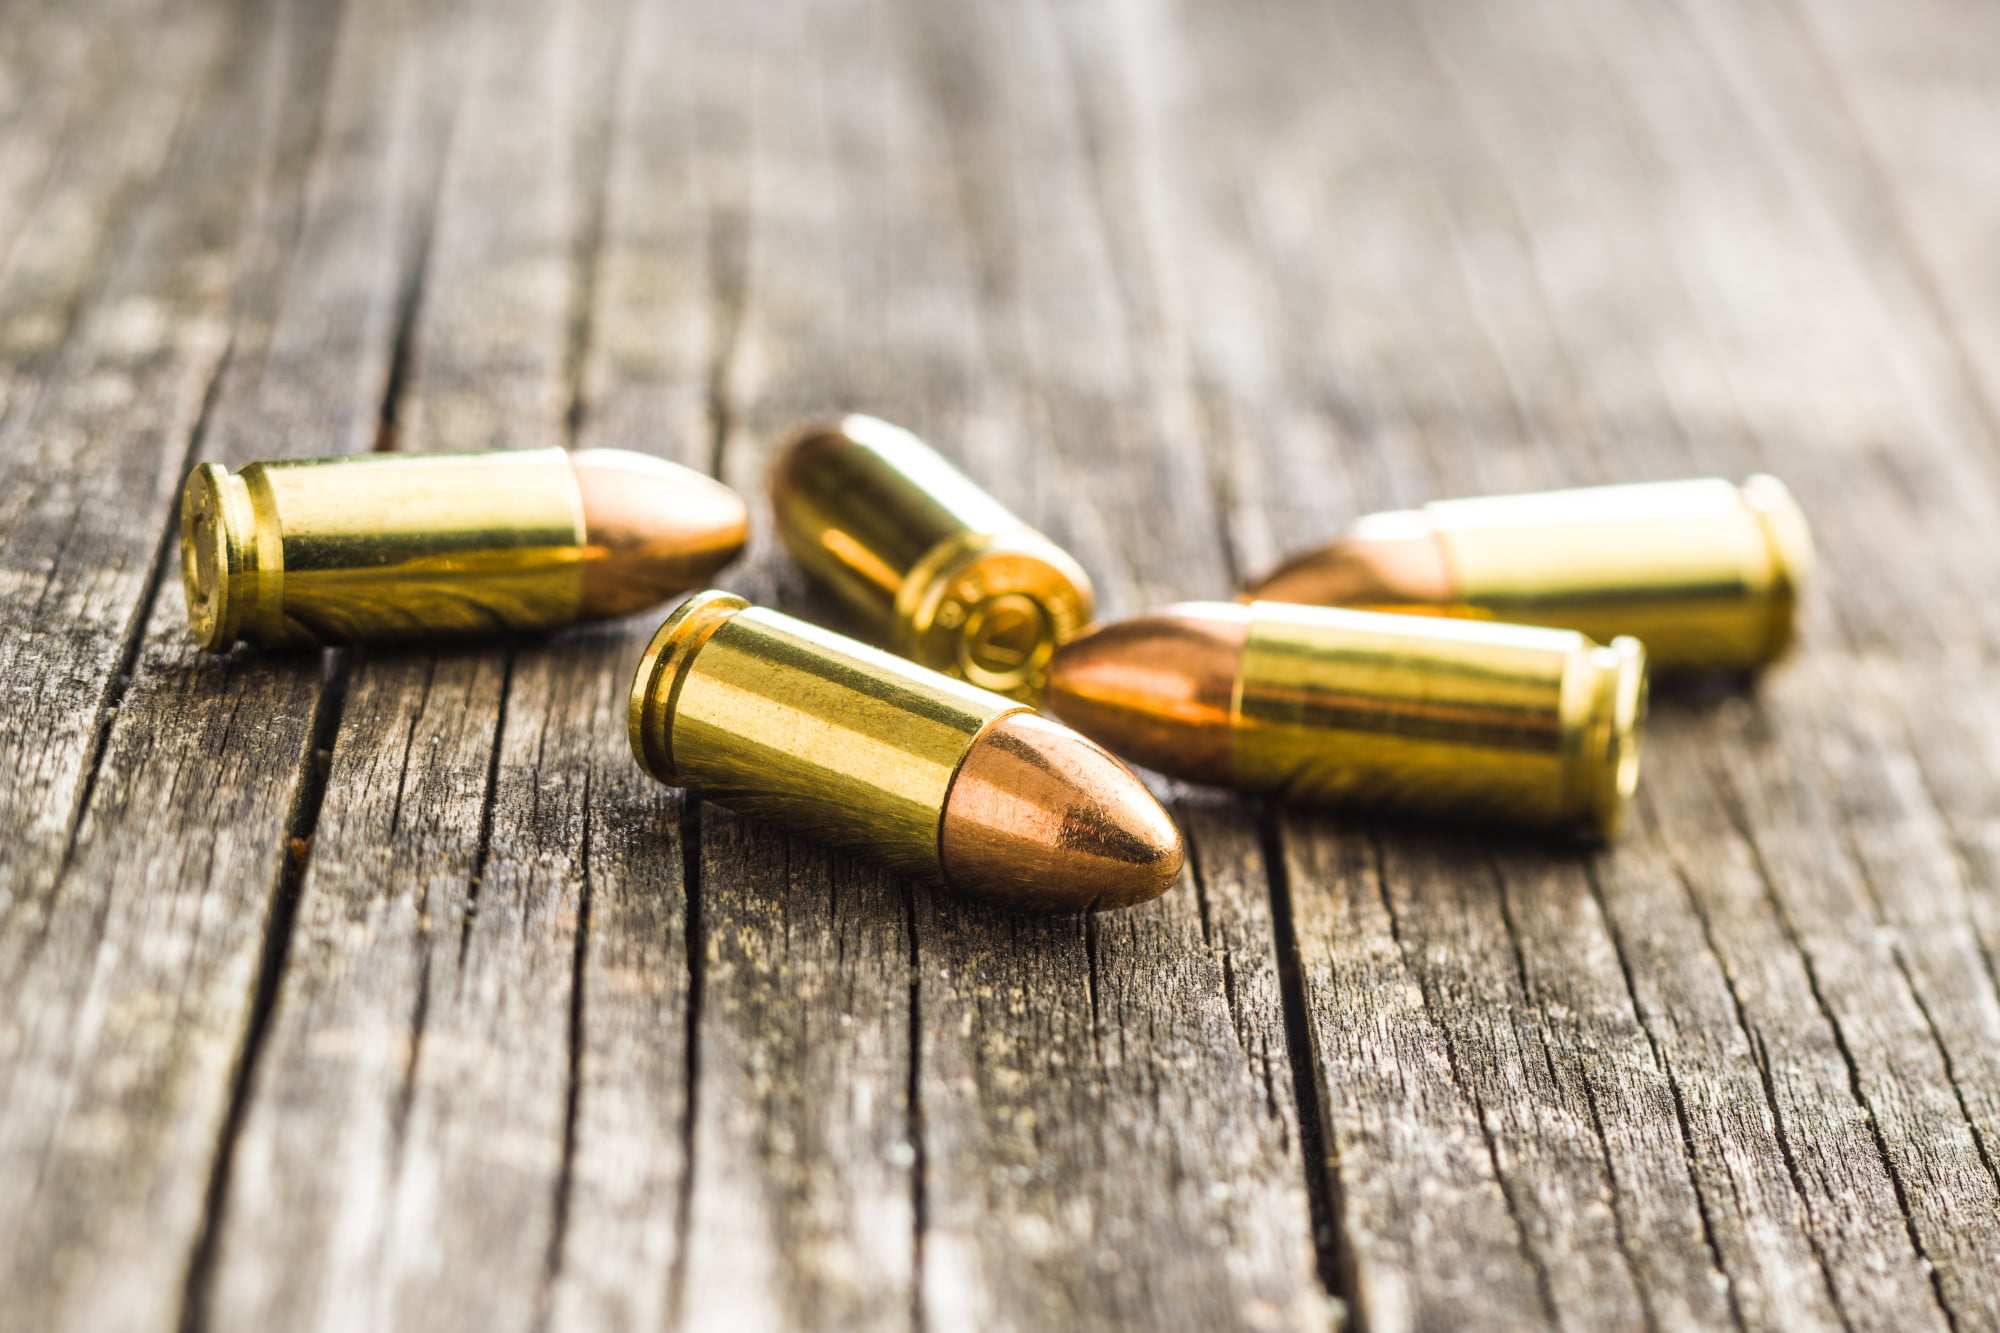 When it comes to choosing the right ammunition for your firearm, explore different types of ammo and important factors to consider.